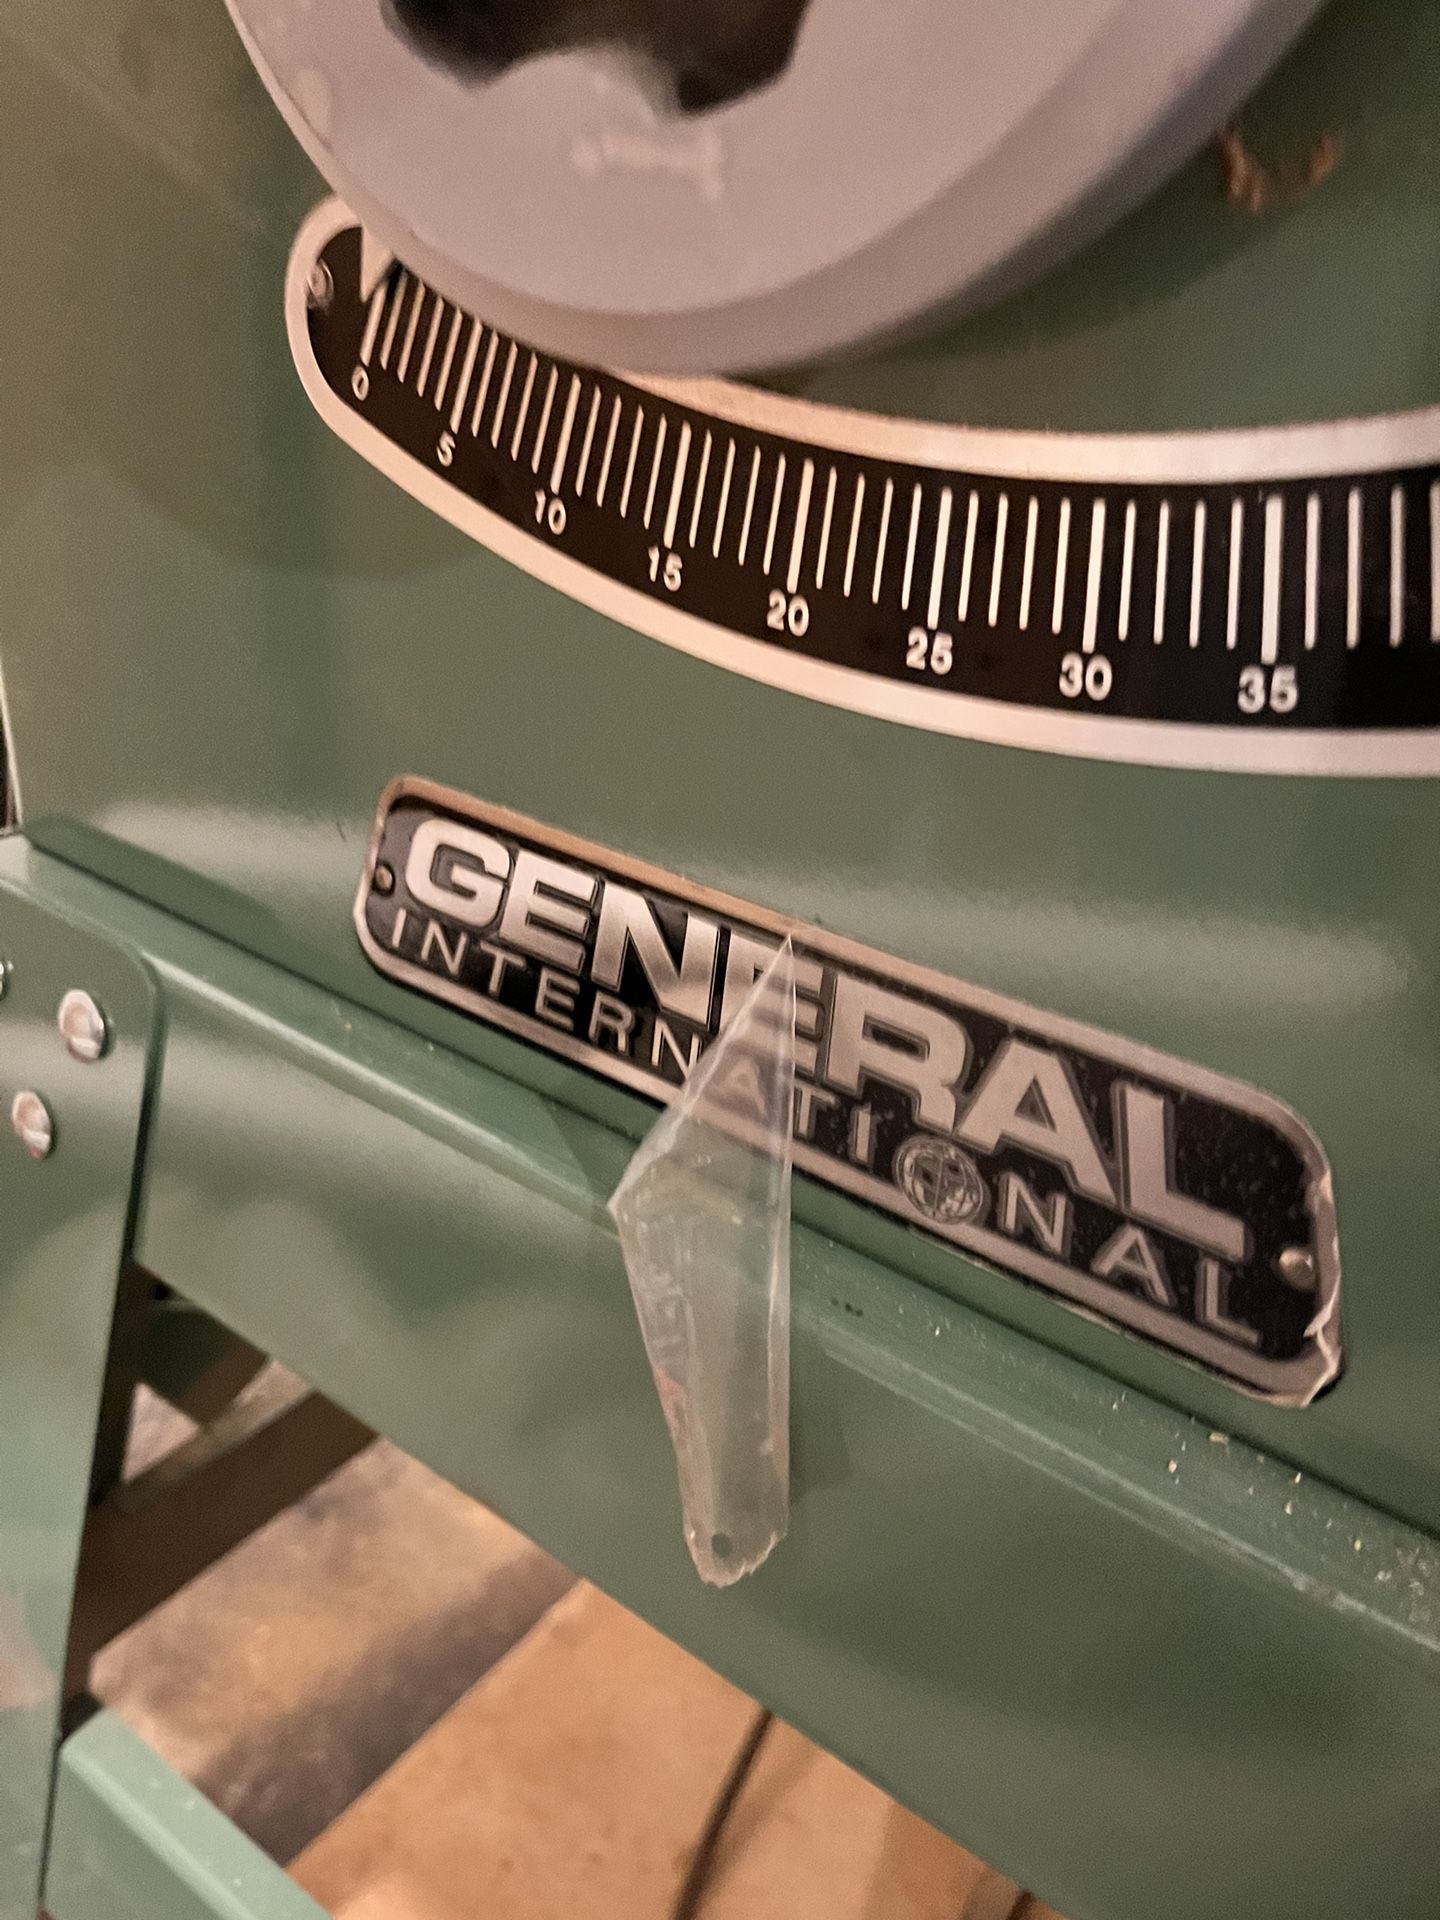 General Contractor Table Saw